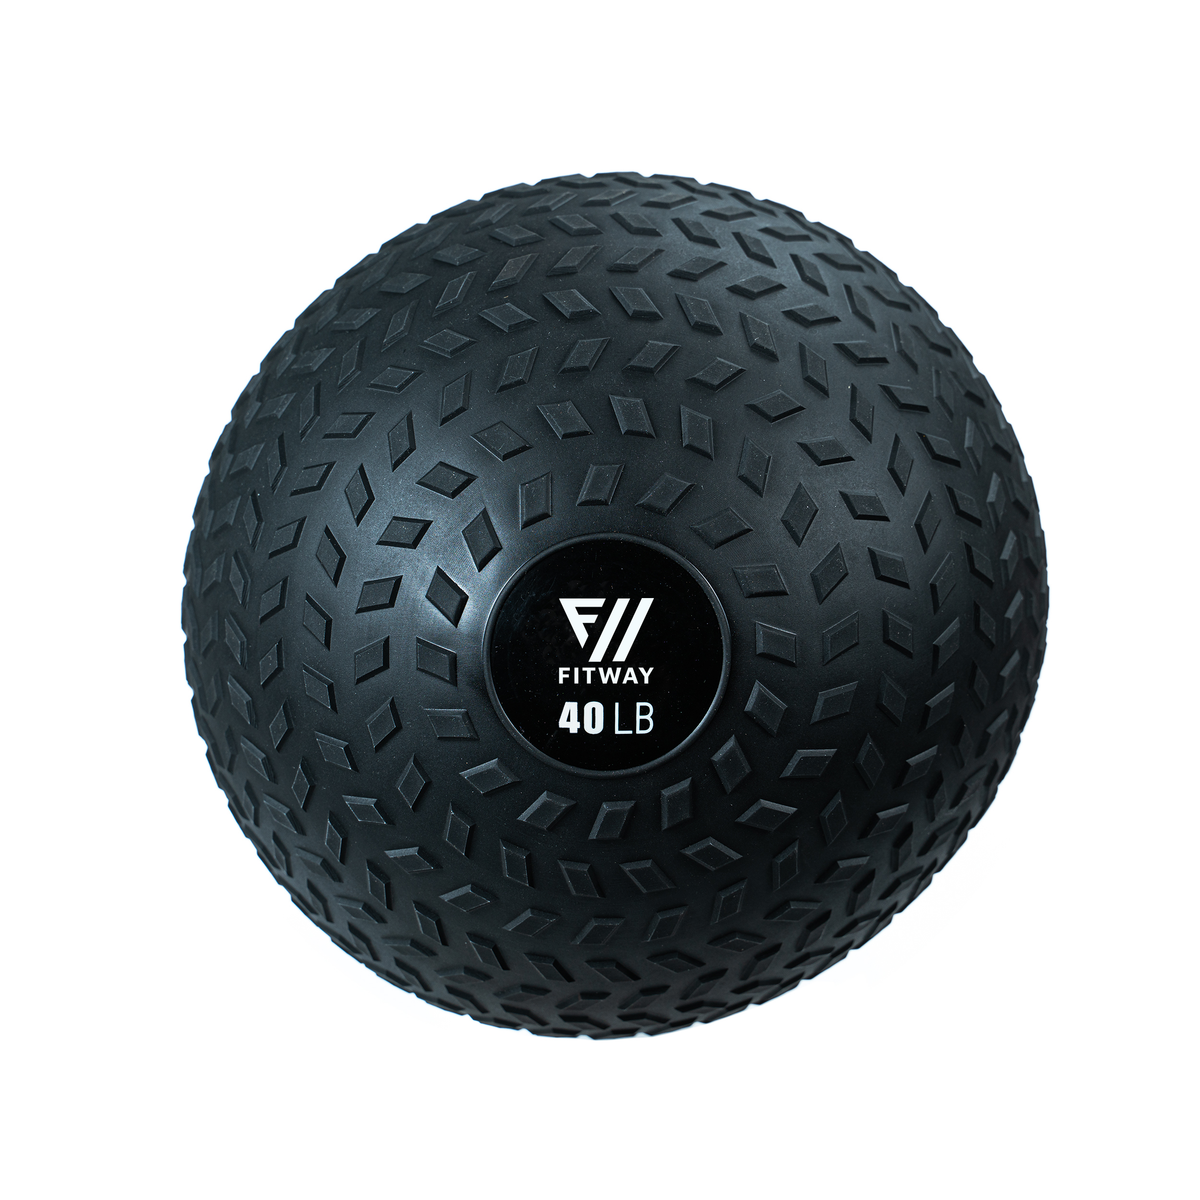 FitWay Equip. Max Grip Slam Ball - 40 Lbs